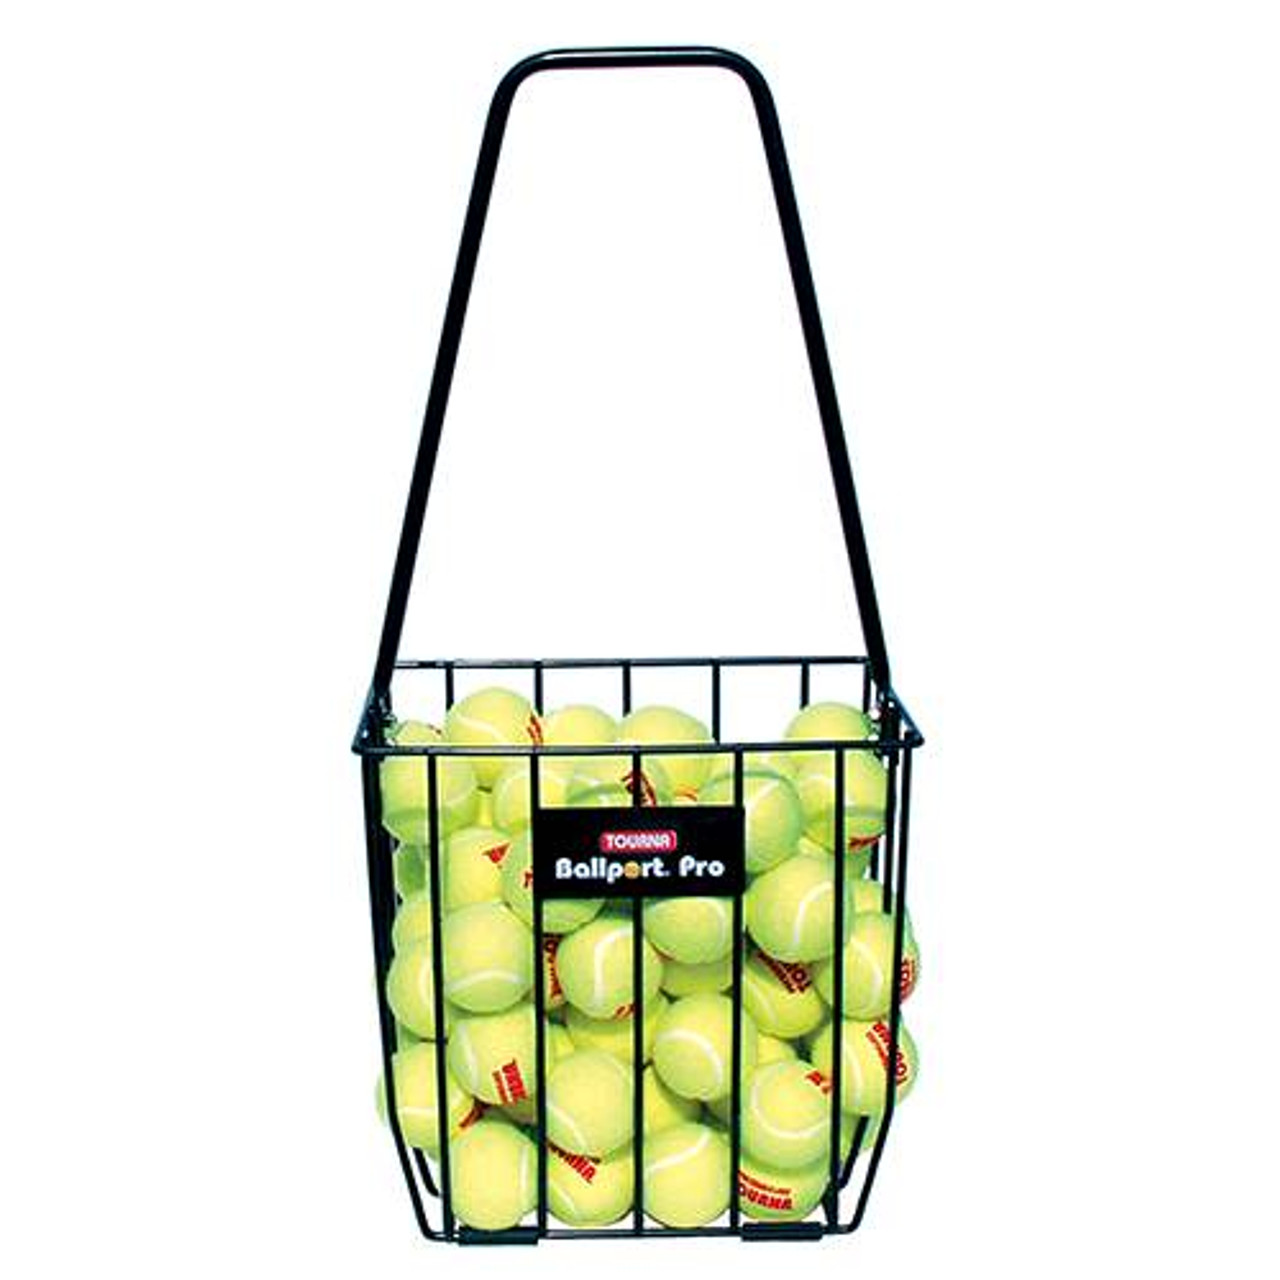 Tennis Ball Retriever-Holds 85 balls with free shipping